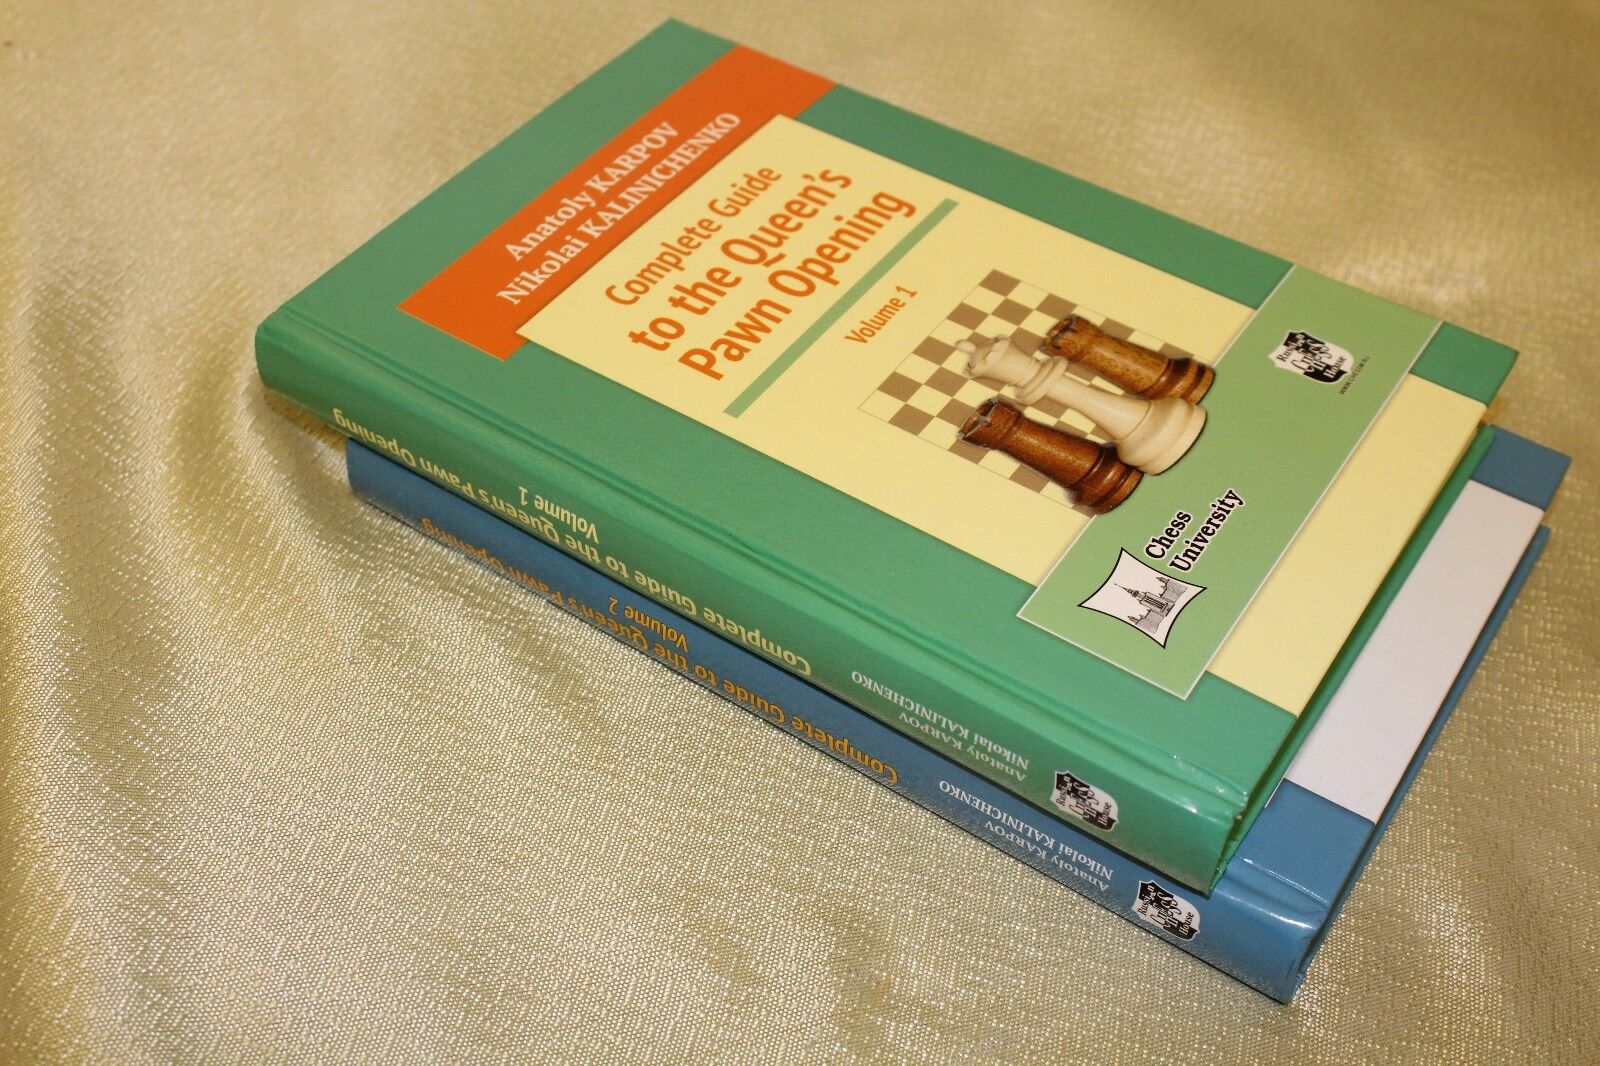 11900.Two Chess Books: Karpov, Kalinichenko.Complete Guide to the Quin's Pawn Opening